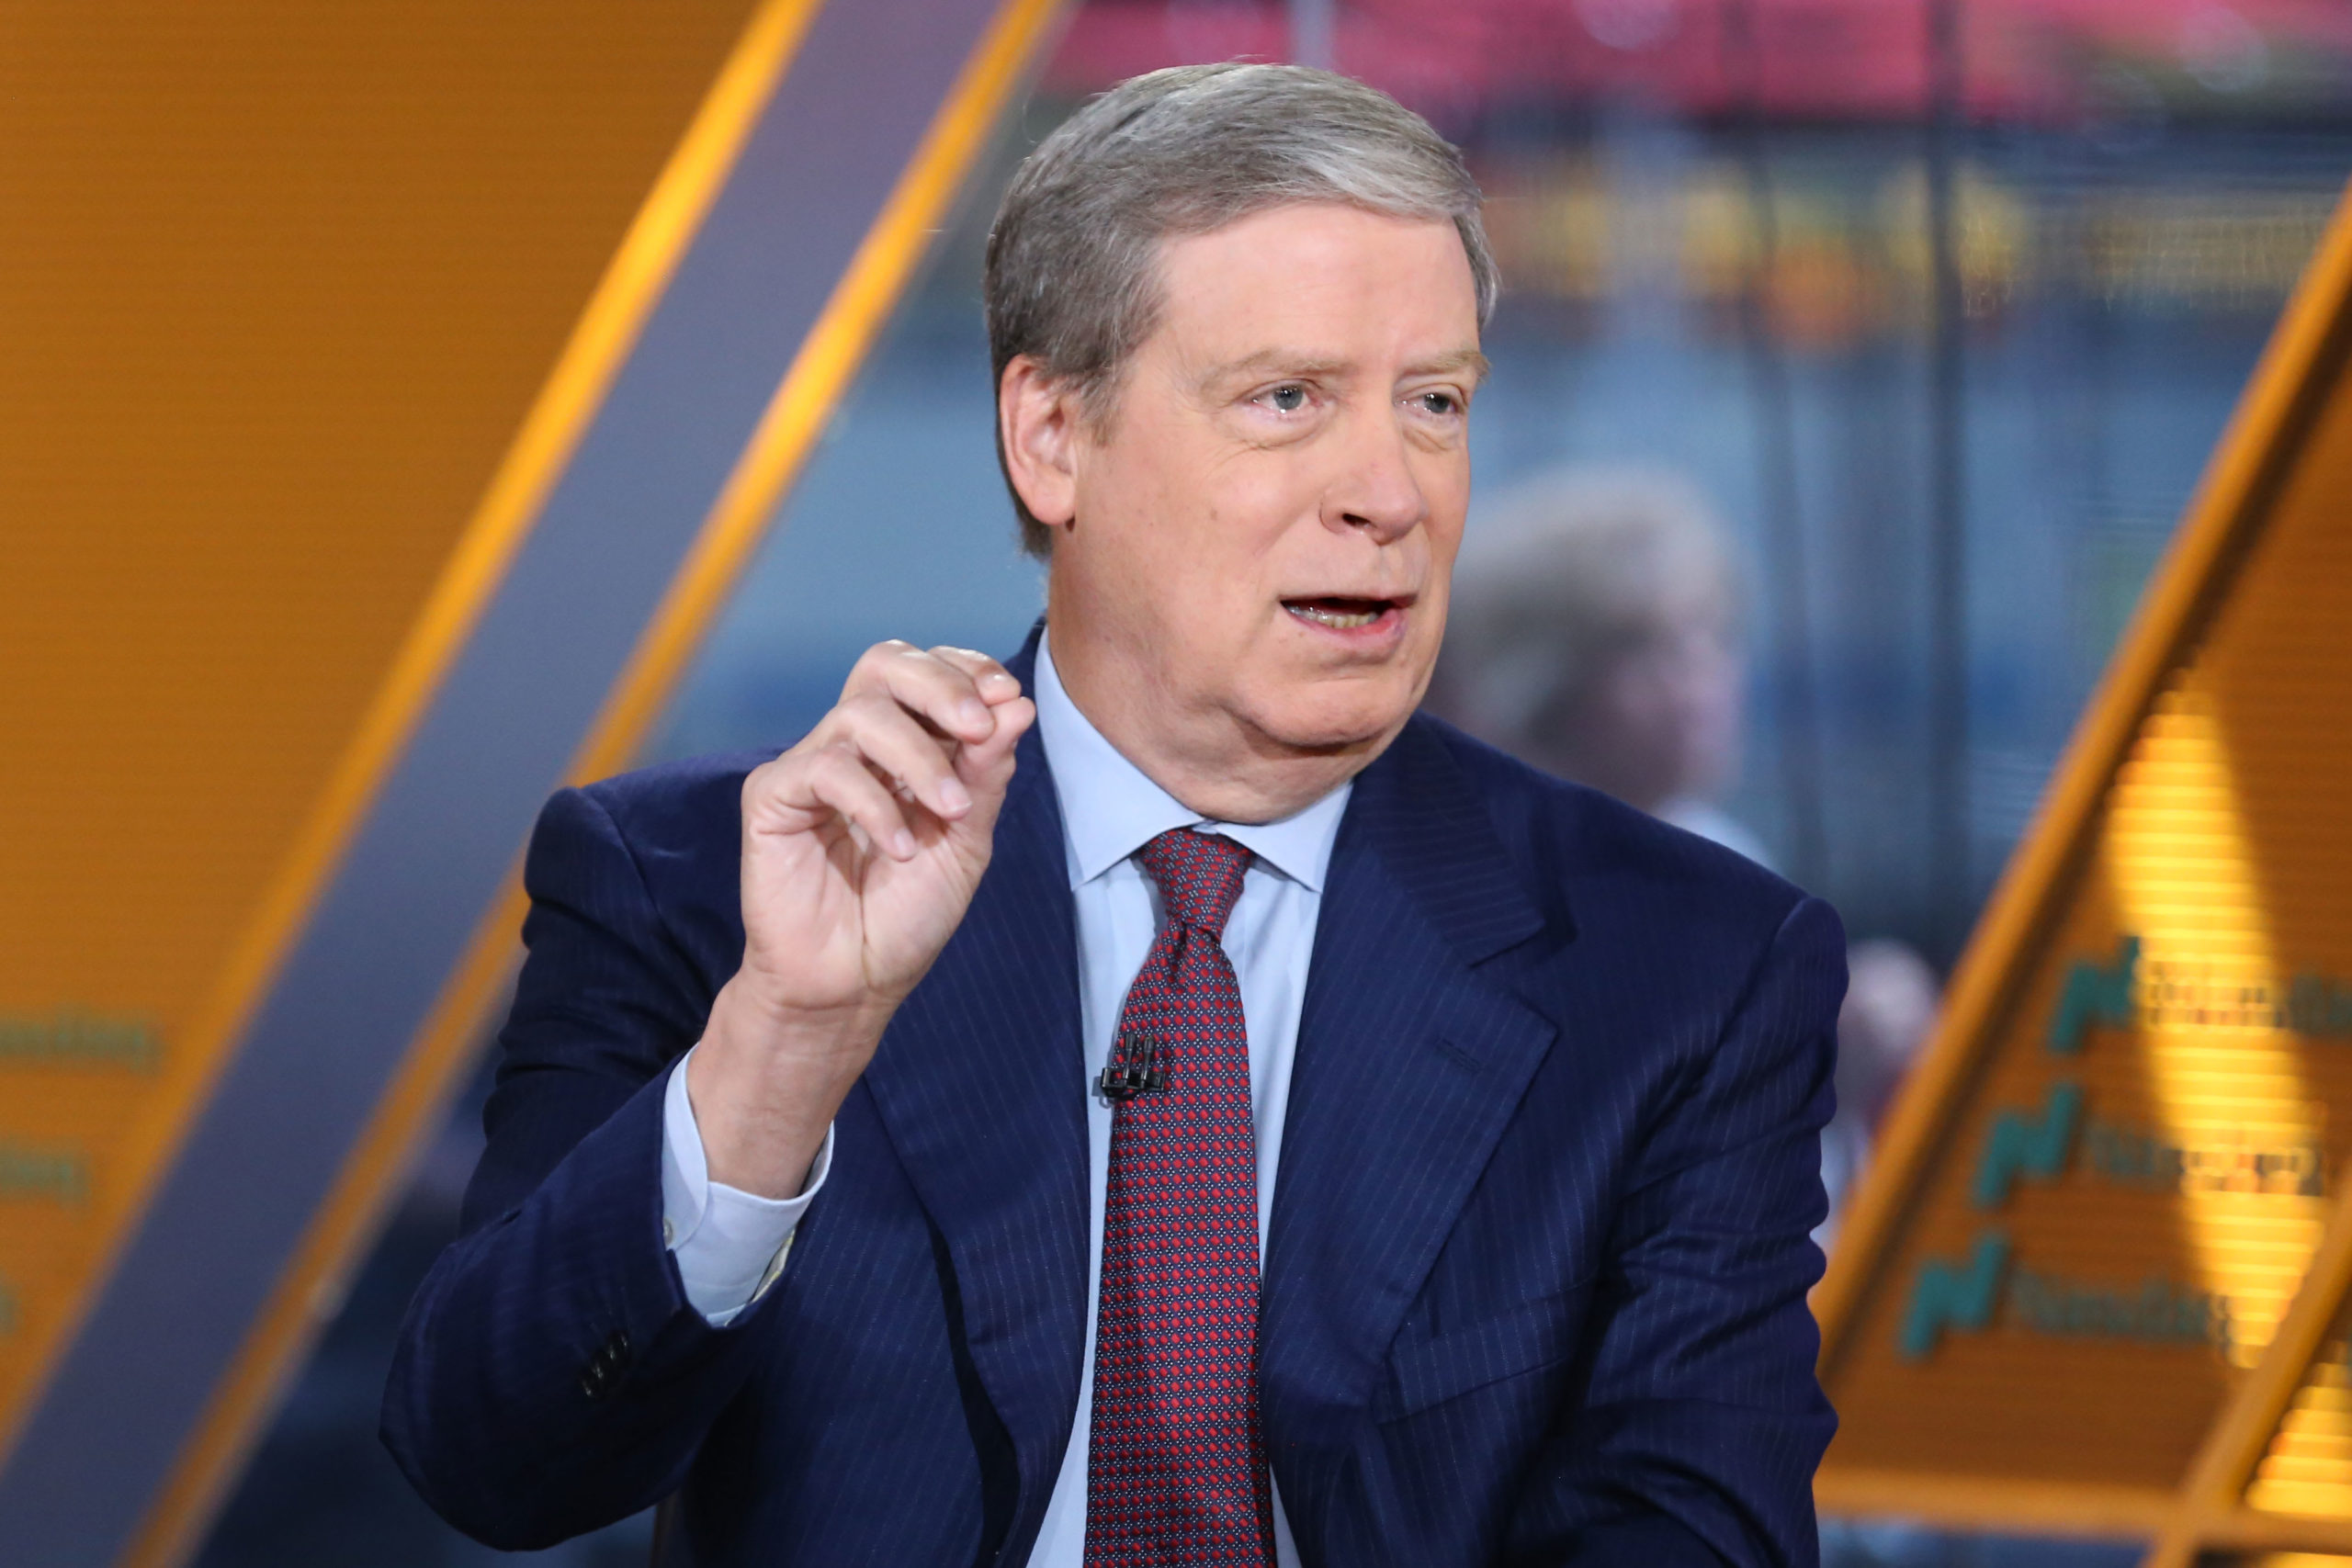 Stanley Druckenmiller agrees with Tepper, nonetheless bullish the market due to the Fed and Trump